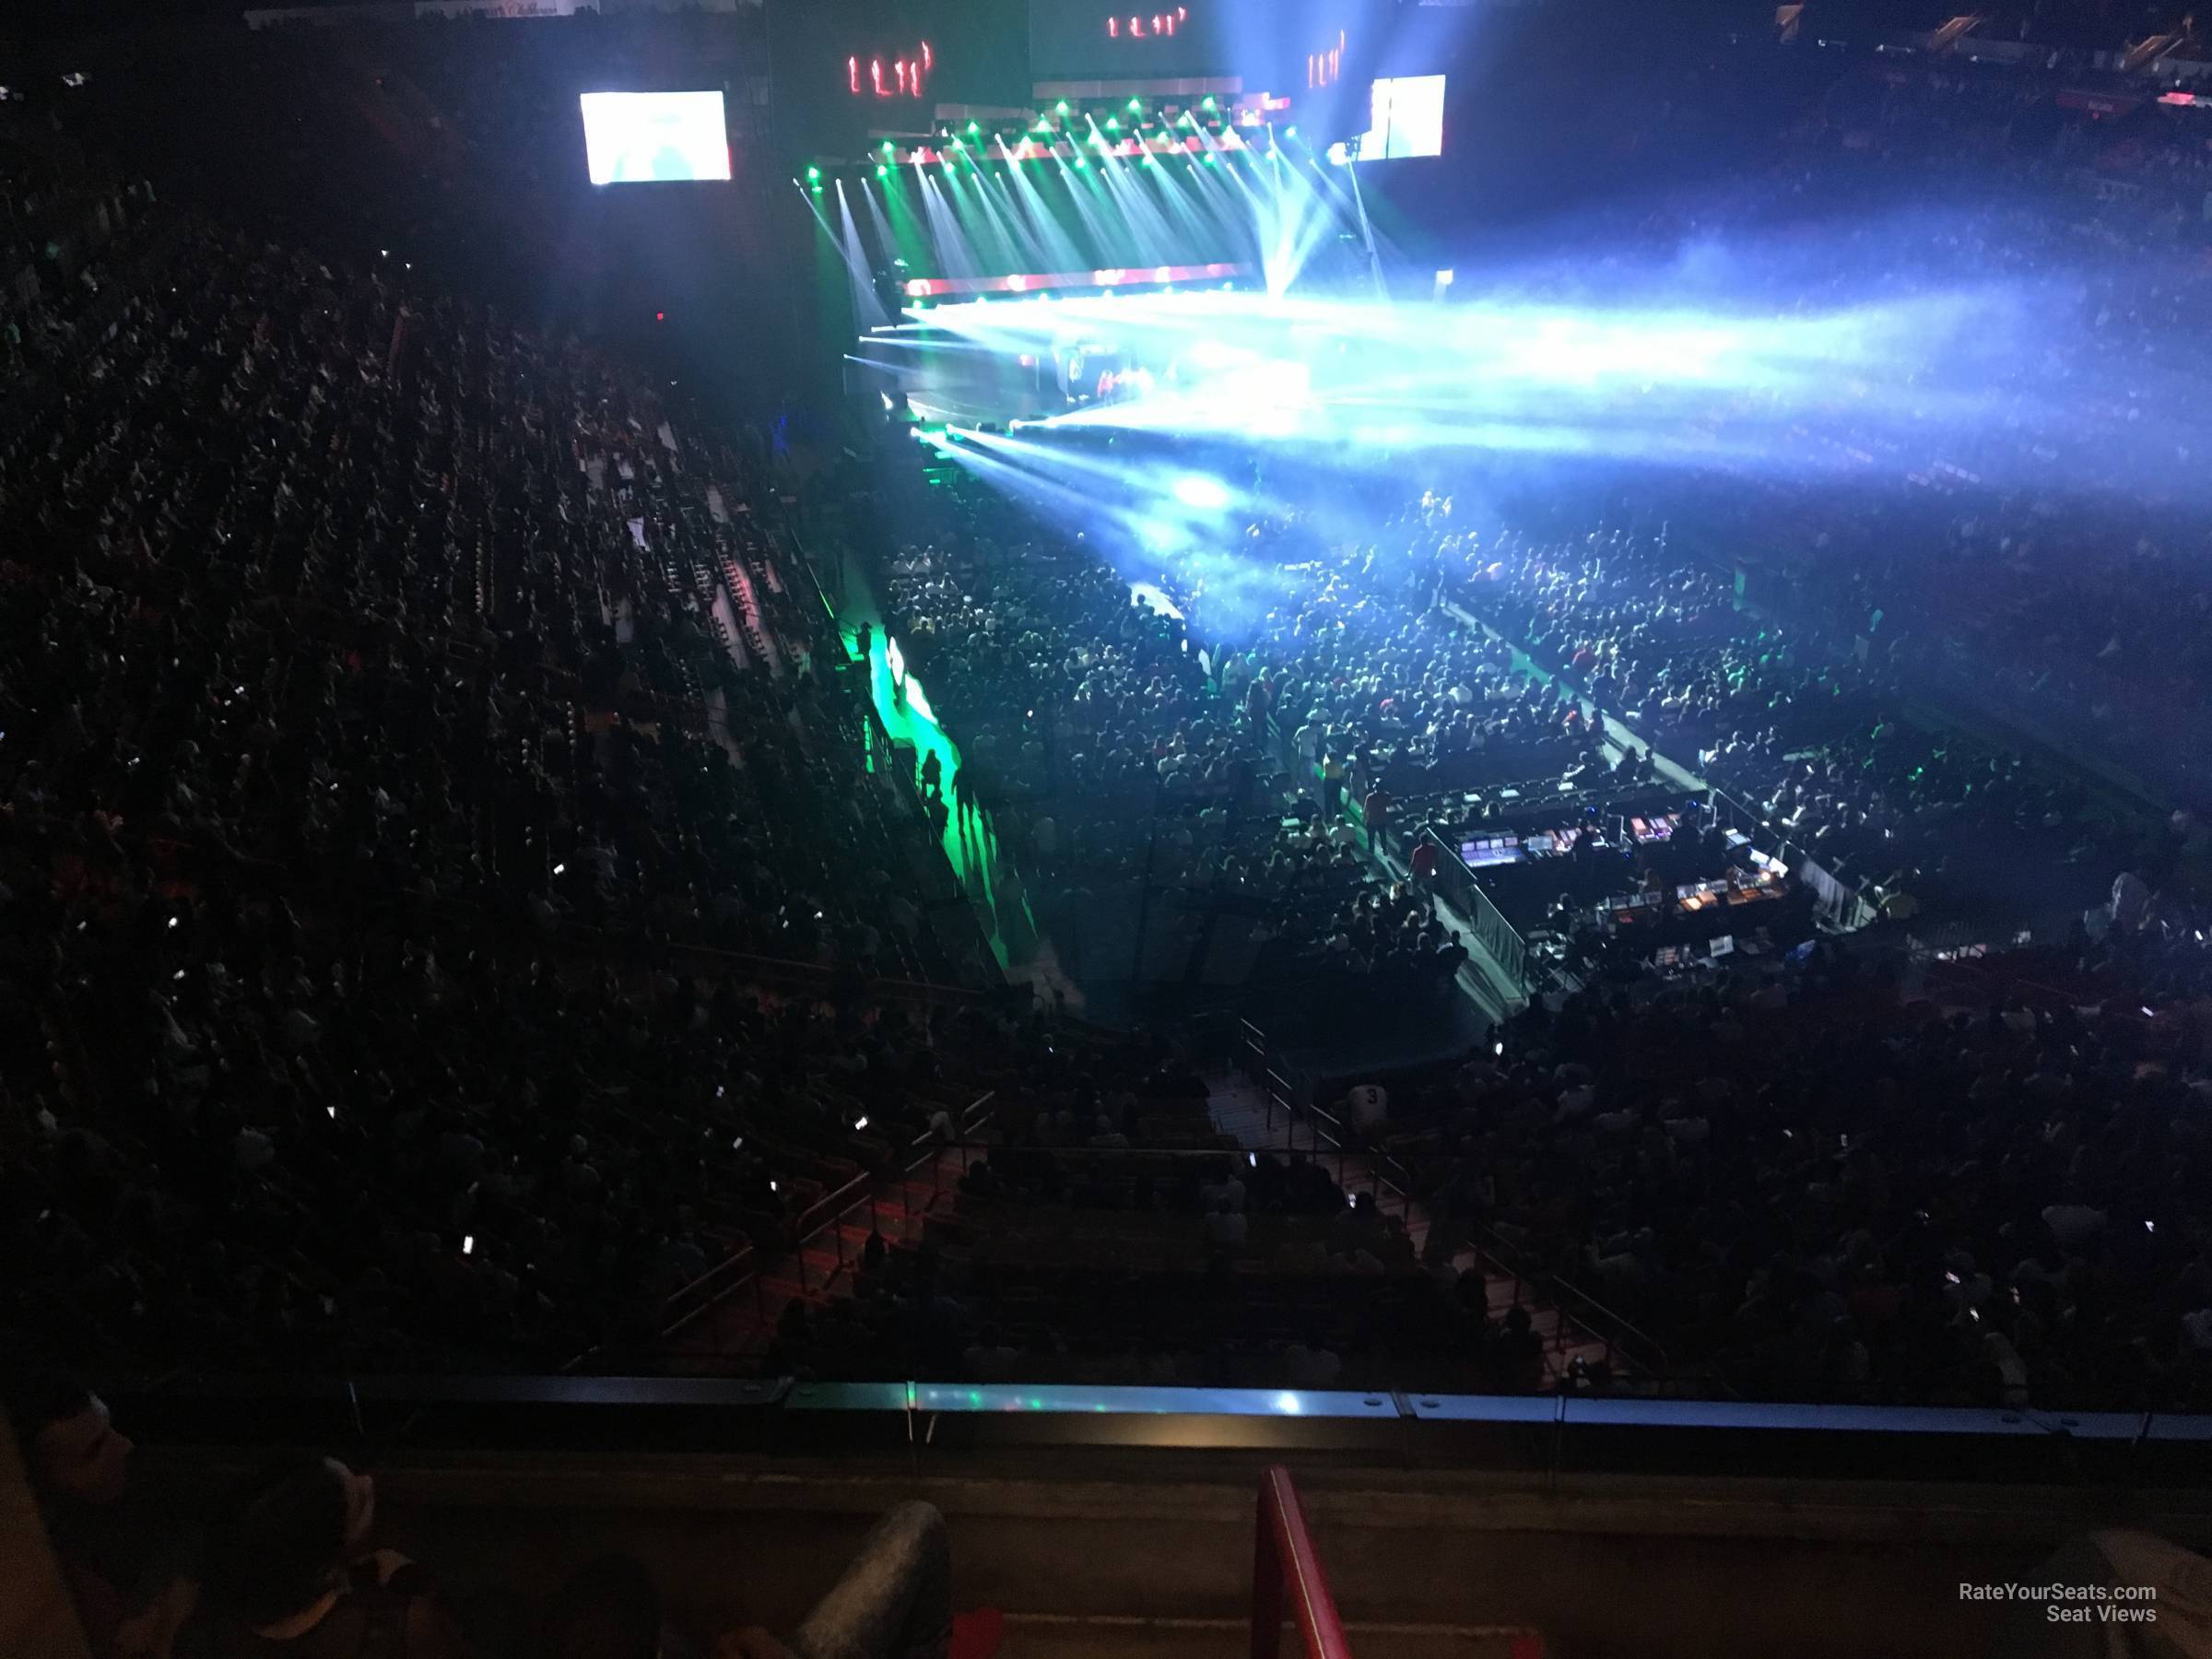 section 318, row 3 seat view  for concert - miami-dade arena